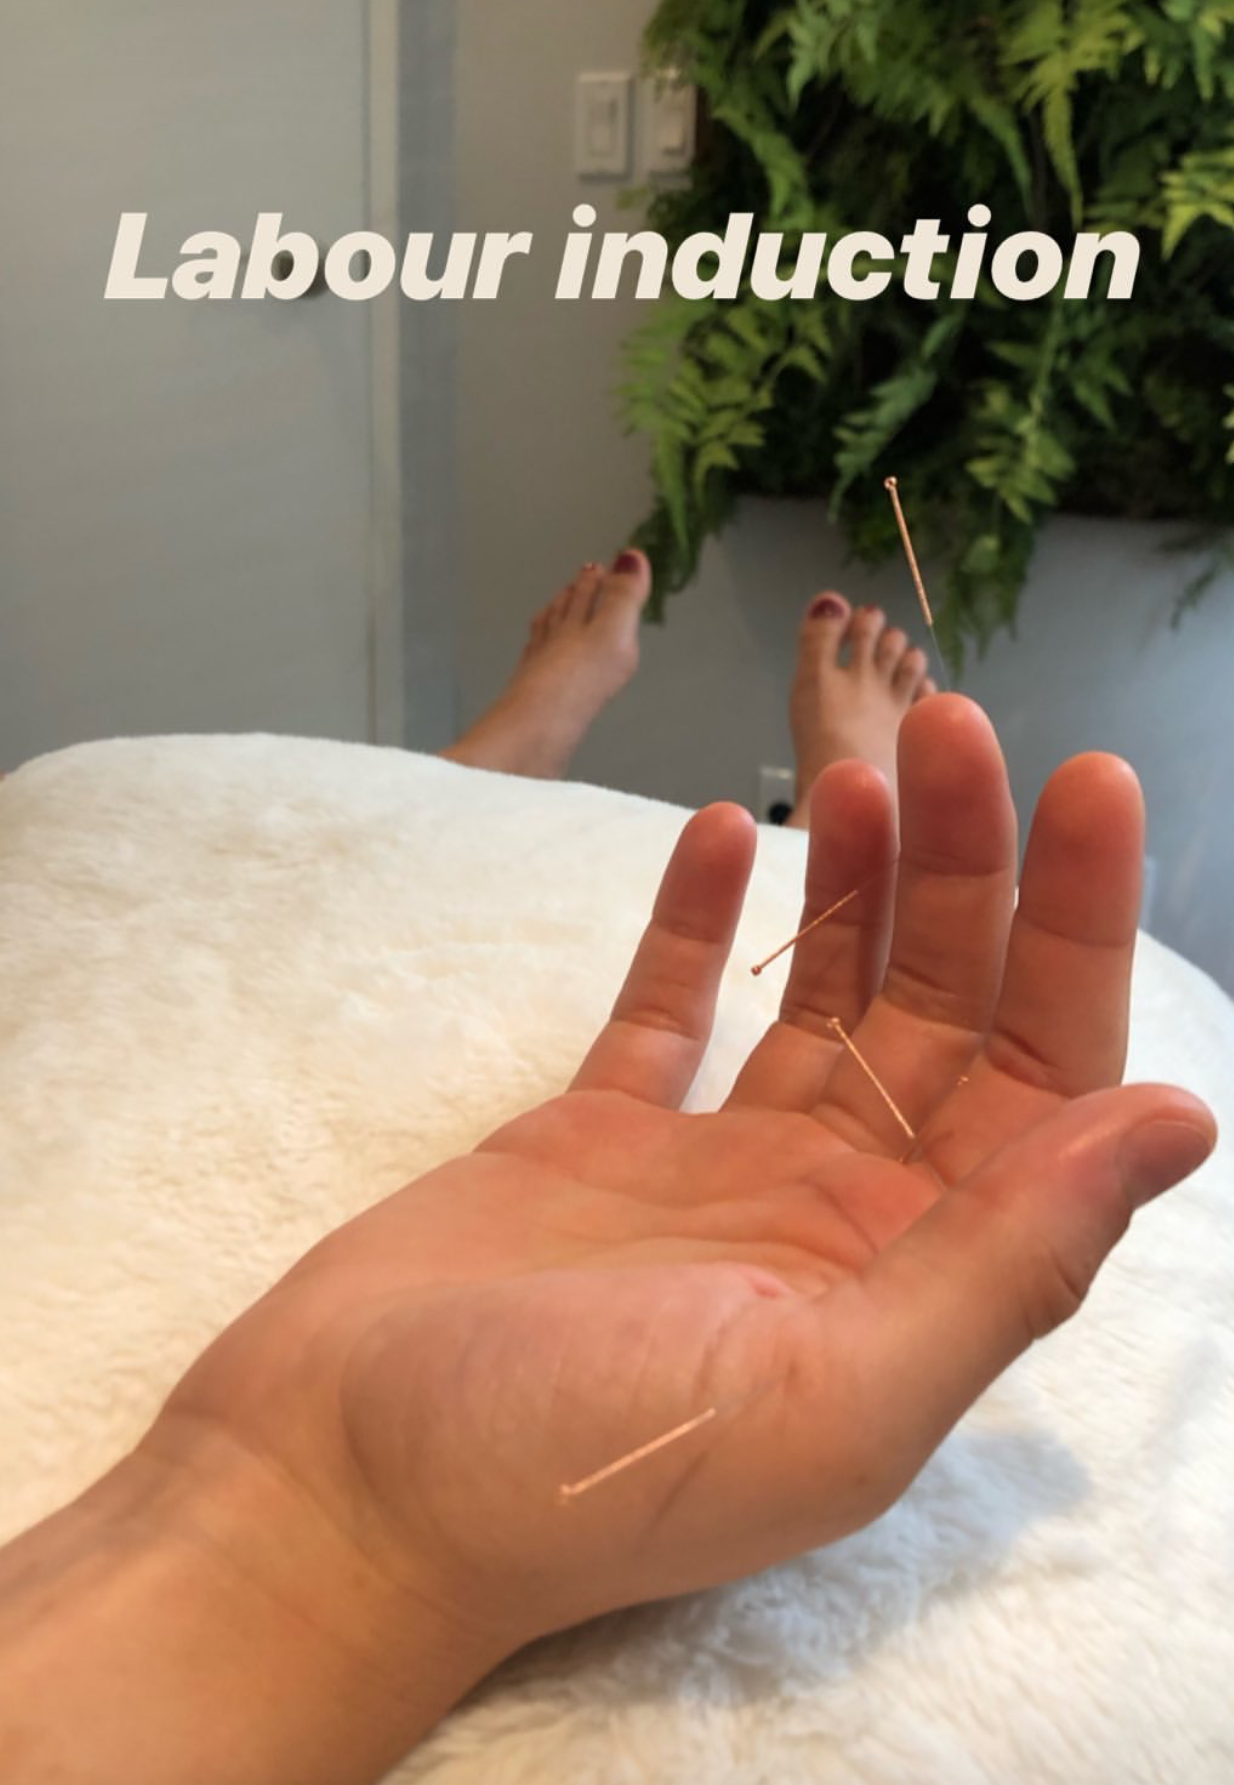  SuJok acupuncture in Vancouver used to treat fertility and reproductive health. Patient receives treatment for labor induction  